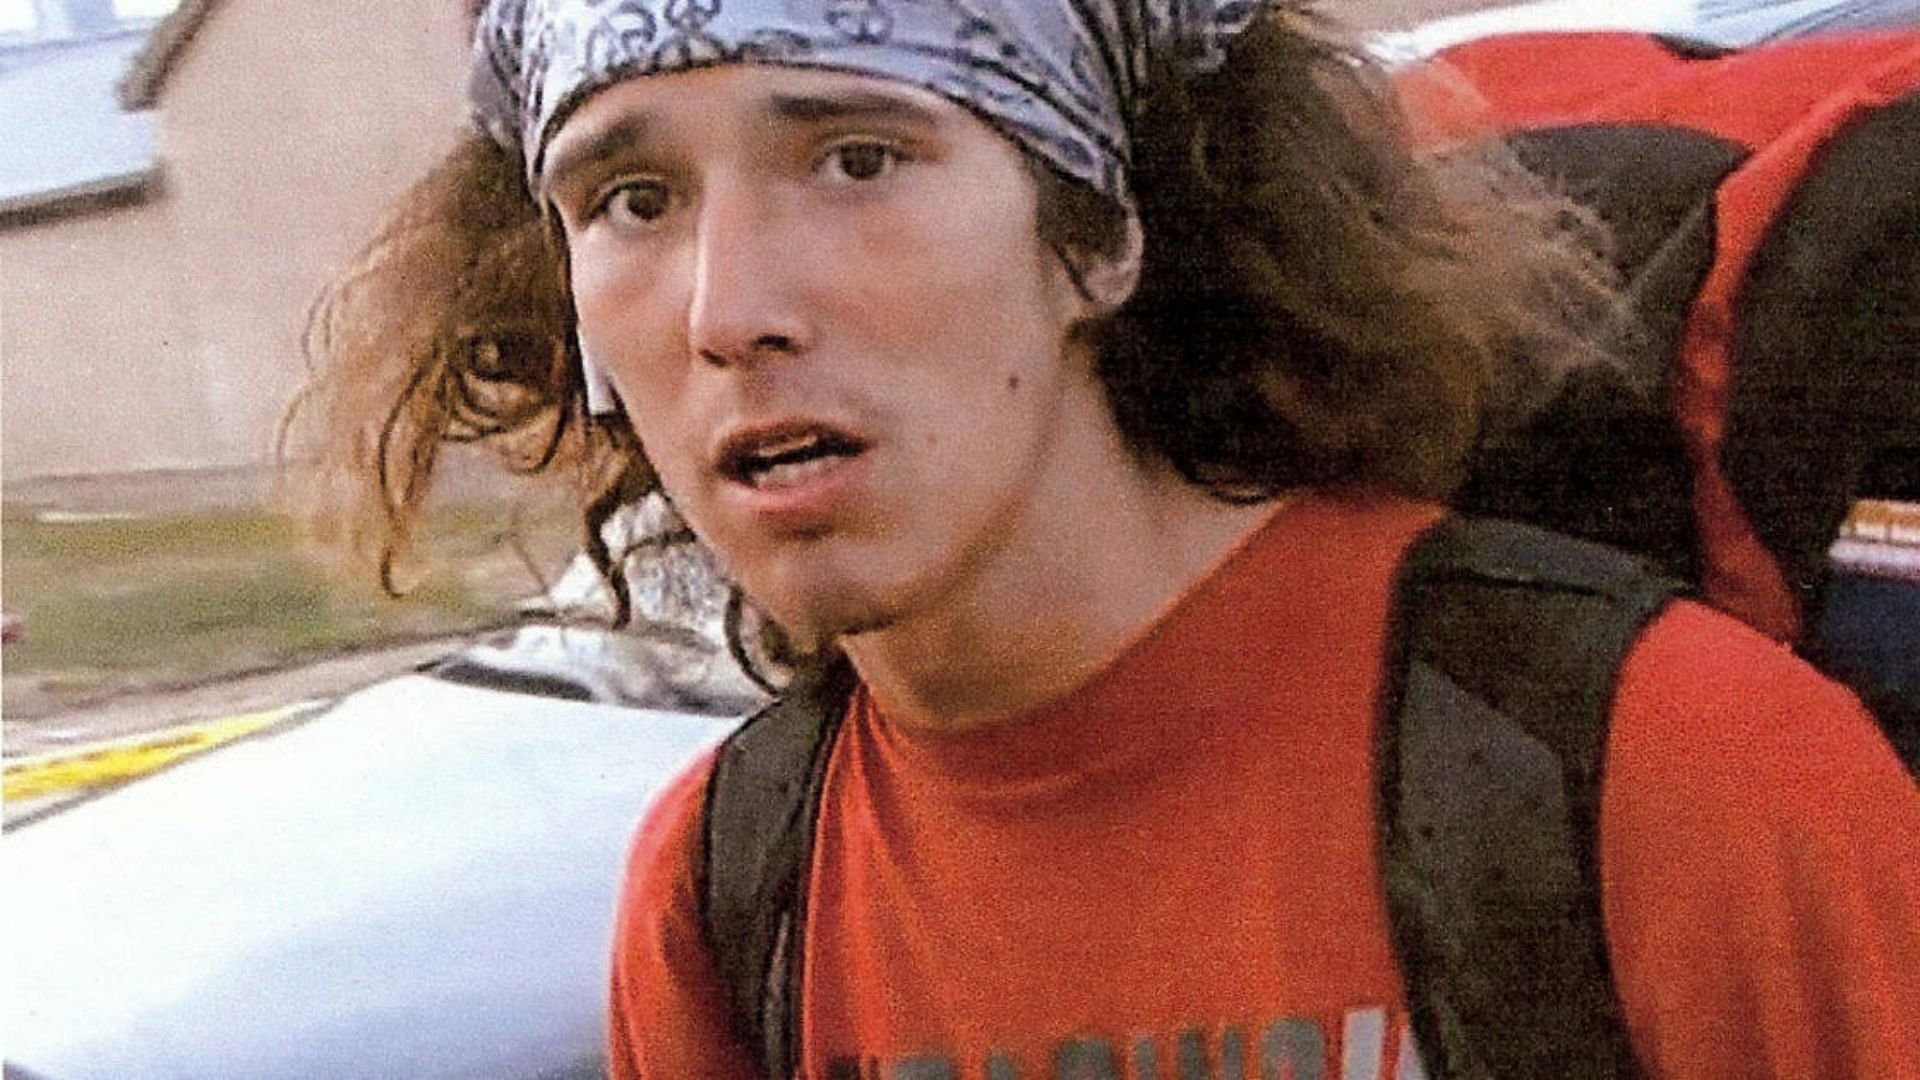 What is The Hatchet Wielding Hitchhiker's real name, and where is he now?